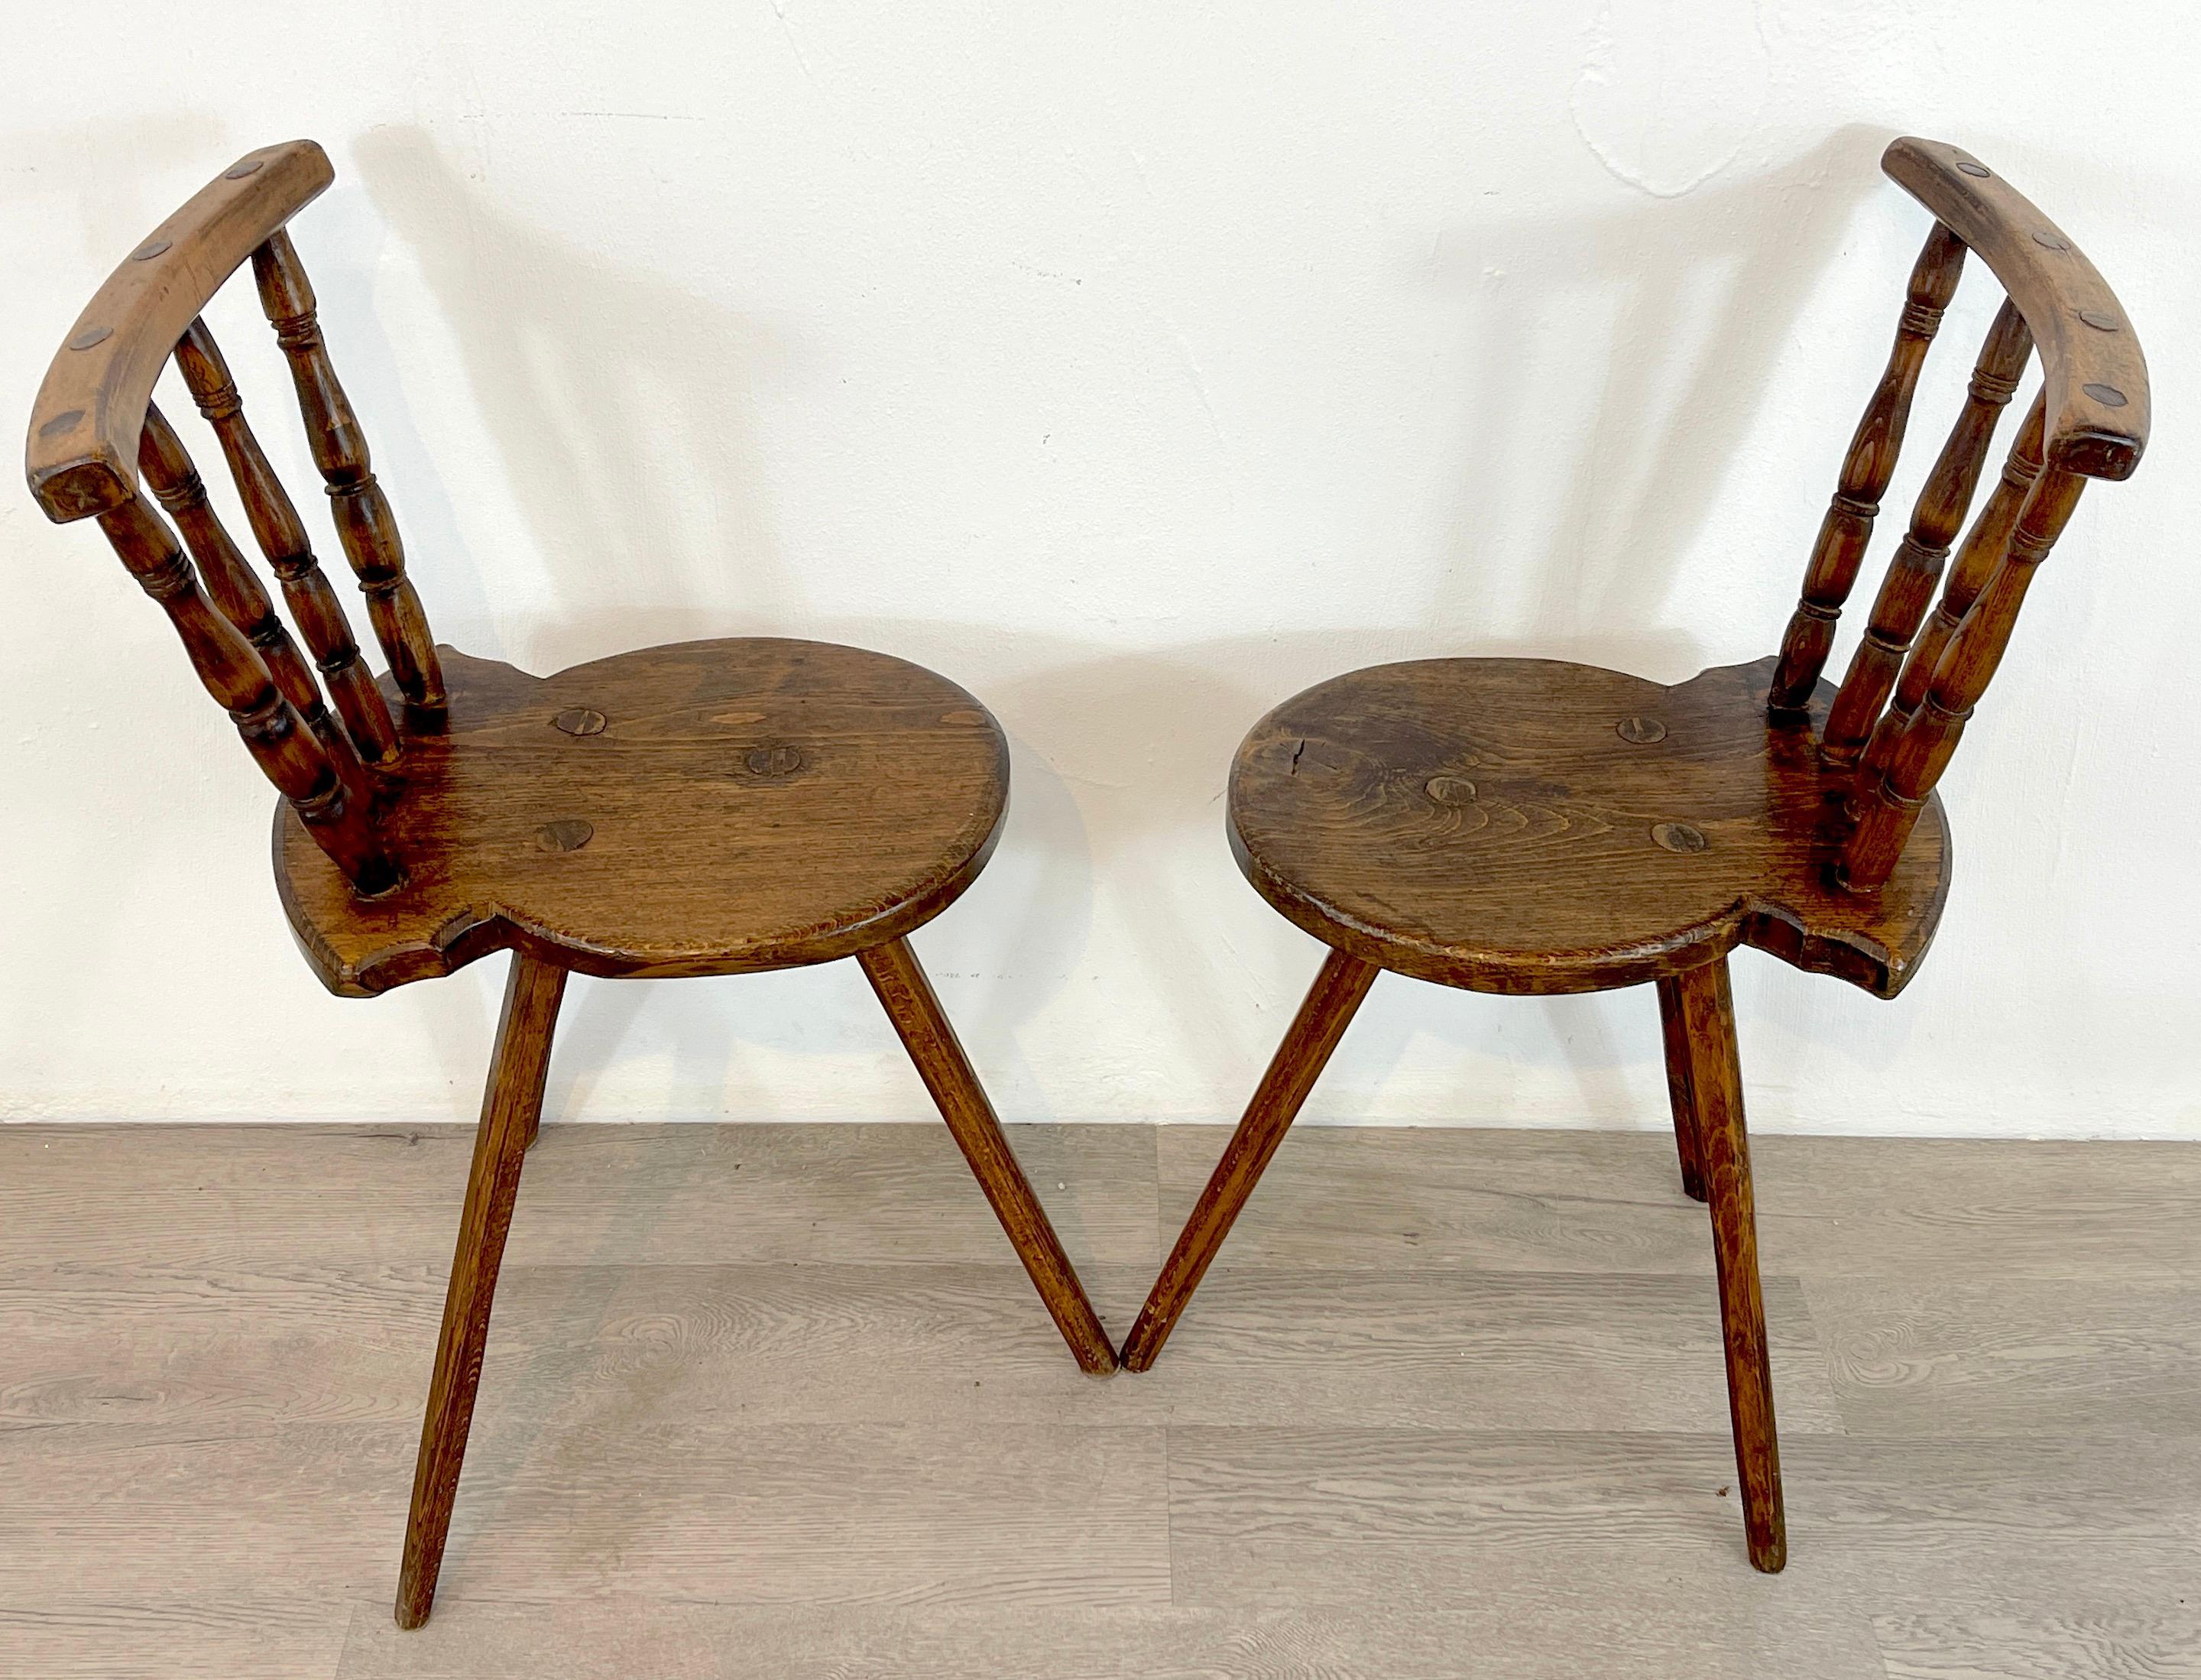 Pair of English Georgian Tripod Captain's chairs, each one of simple design, uniquely shaped with dowel and dovetail construction. Structurally sound.